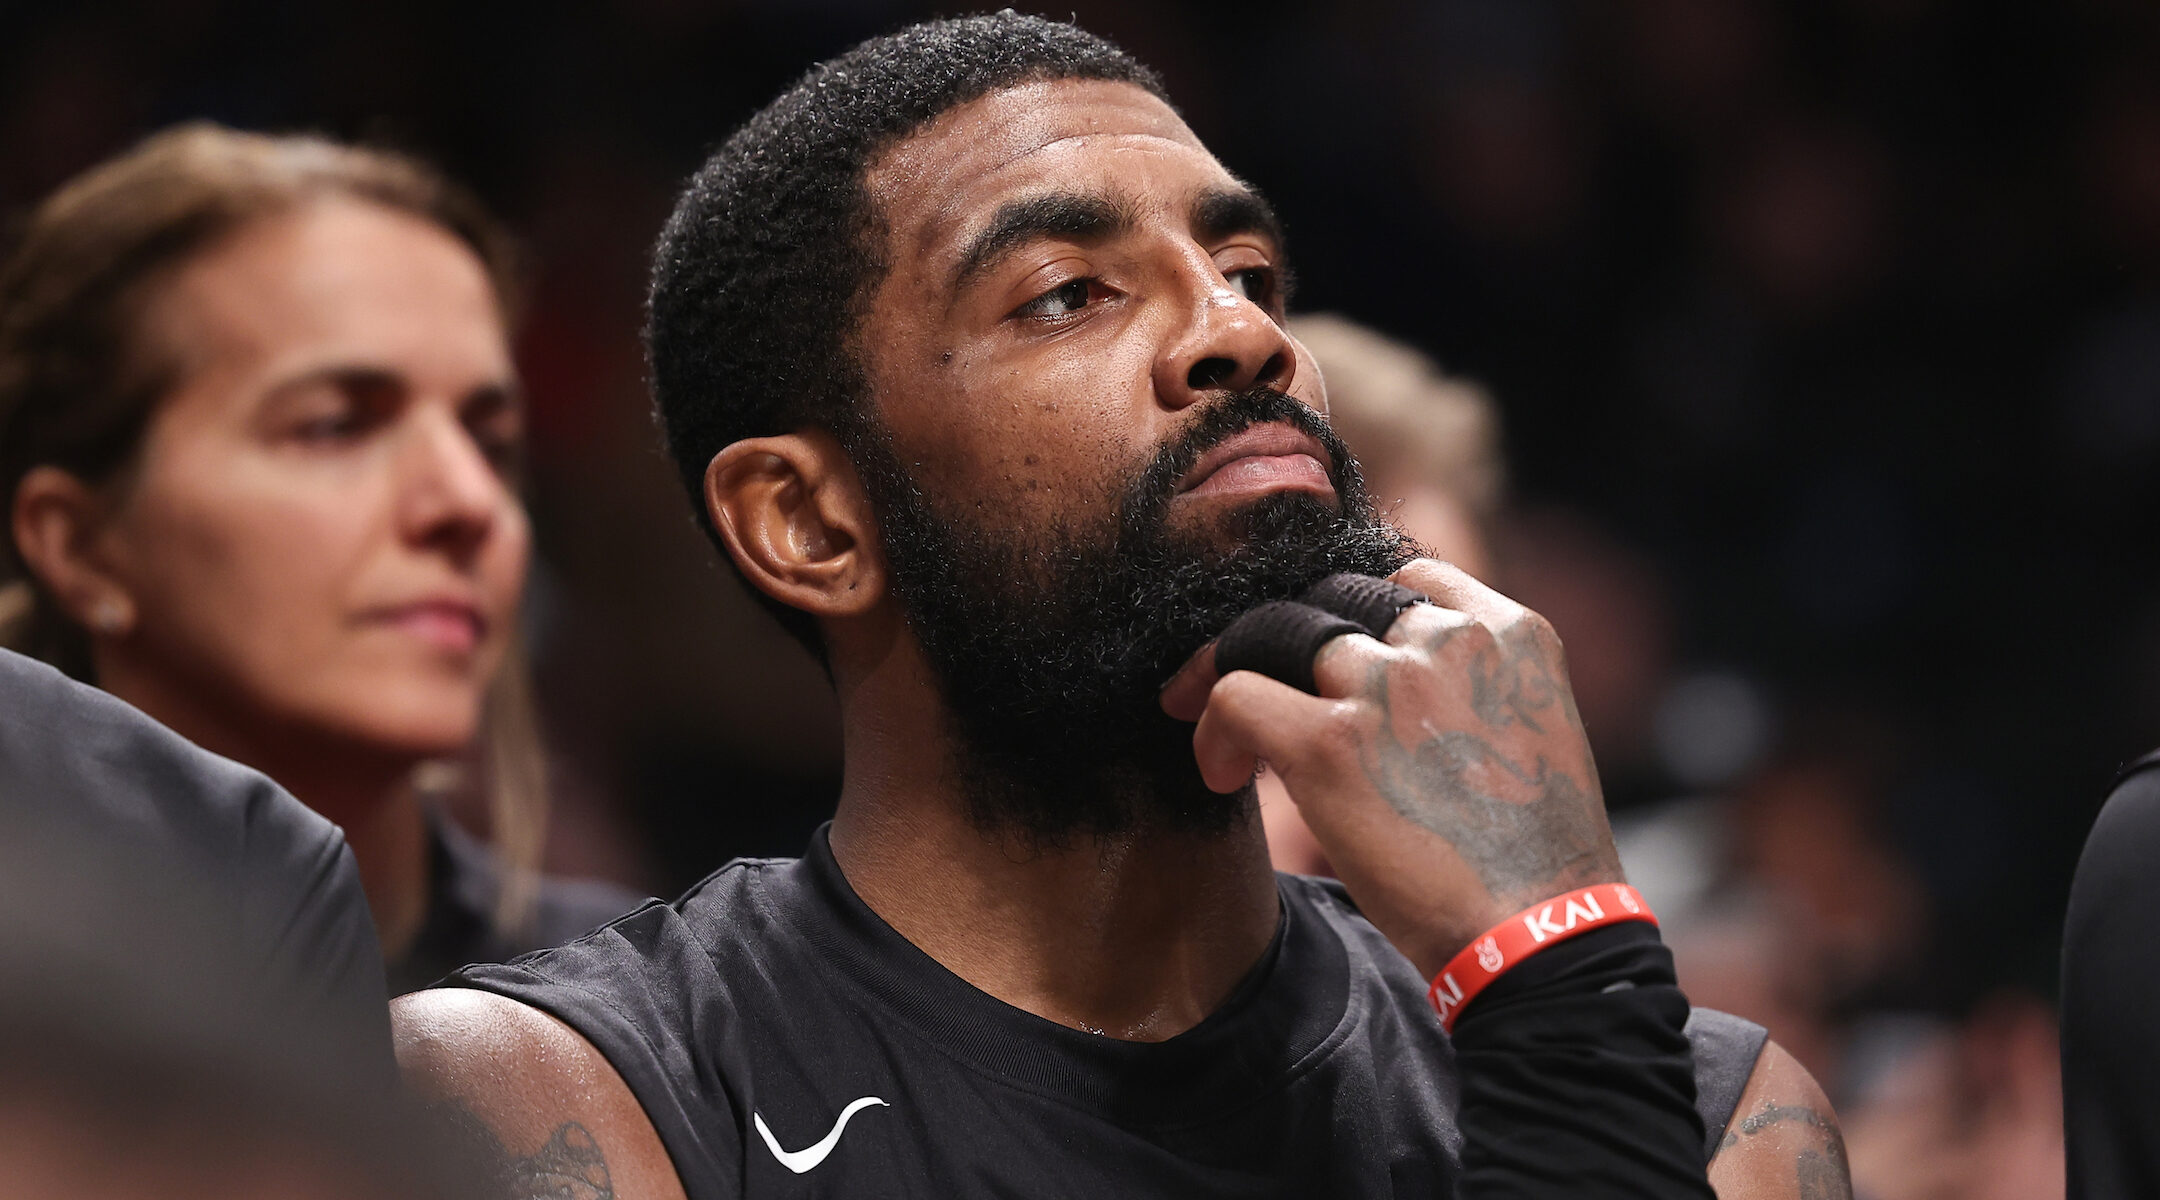 Kyrie Irving says he has Jewish family members, stands by deleting